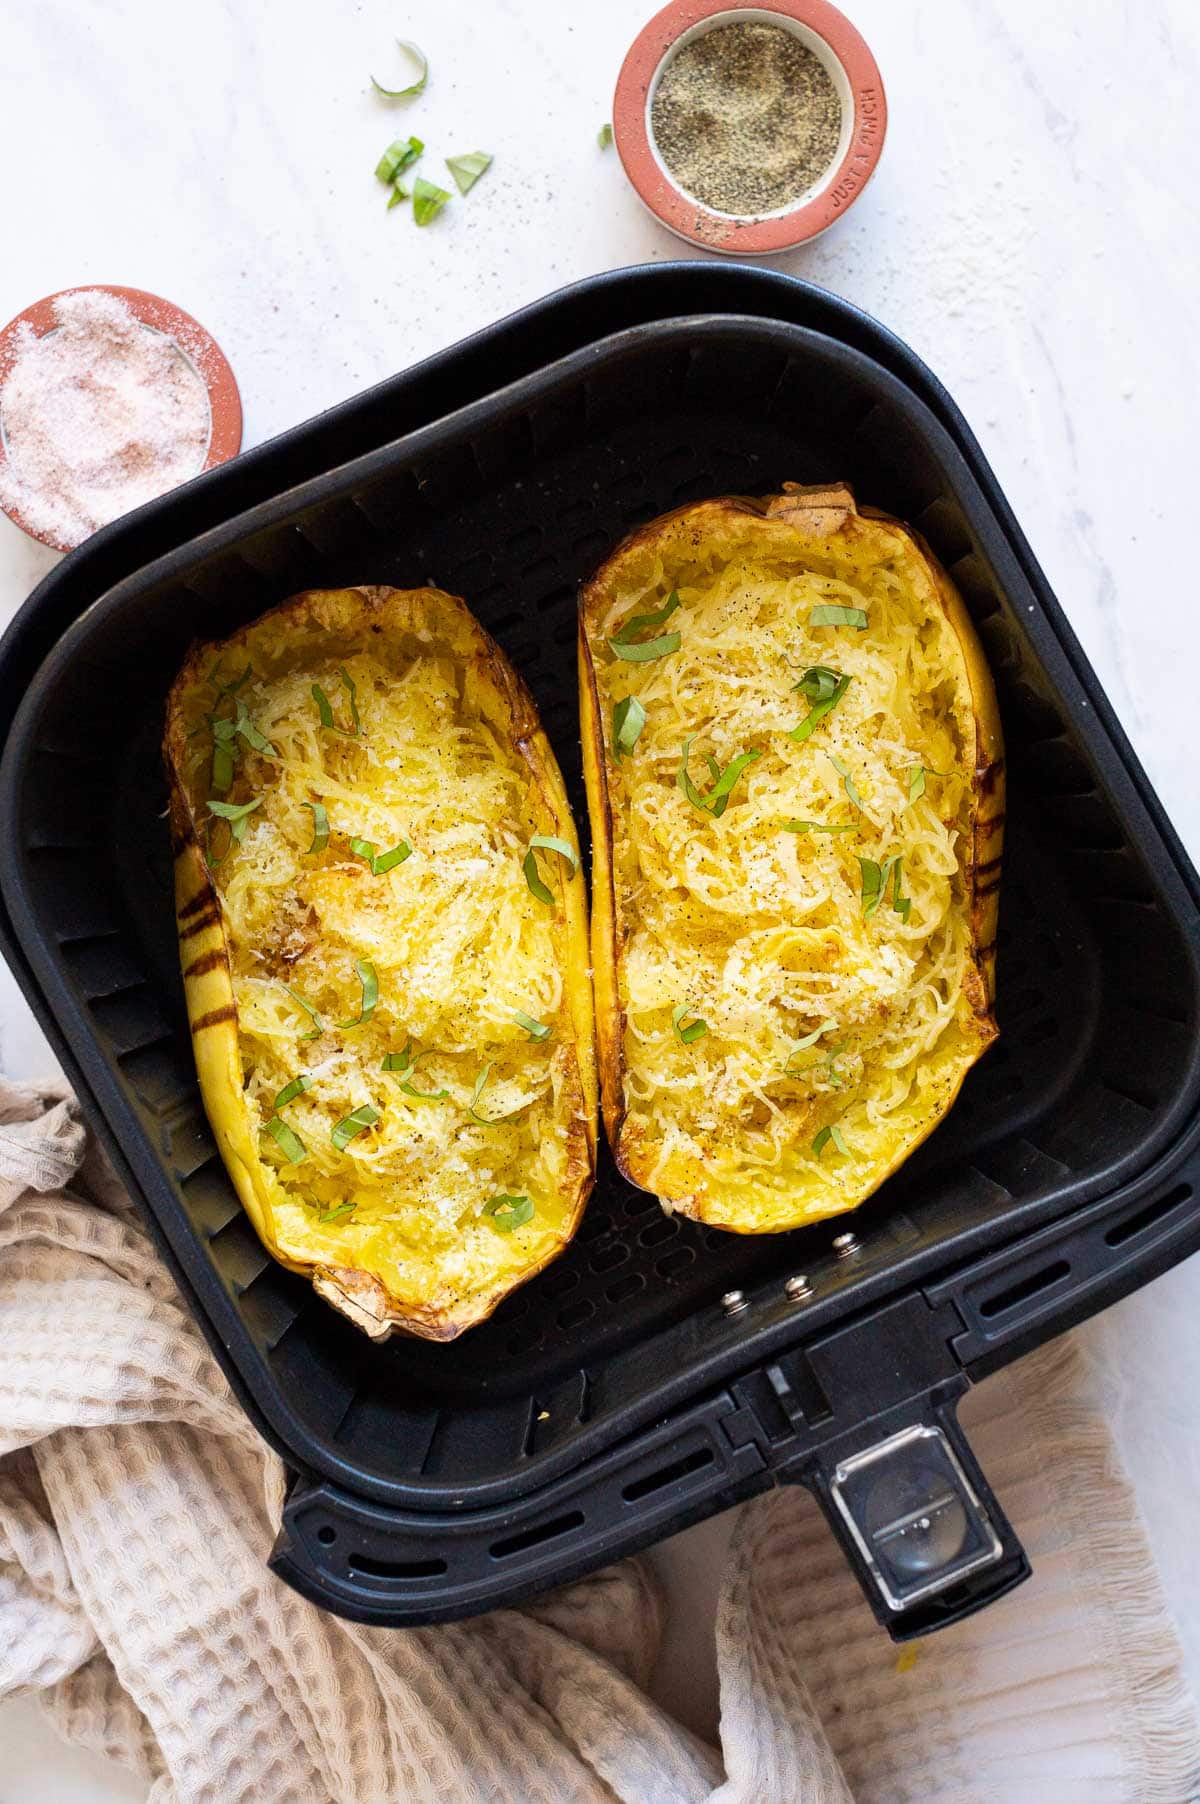 Two halves of spaghetti squash with cheese and basil in air fryer basket.